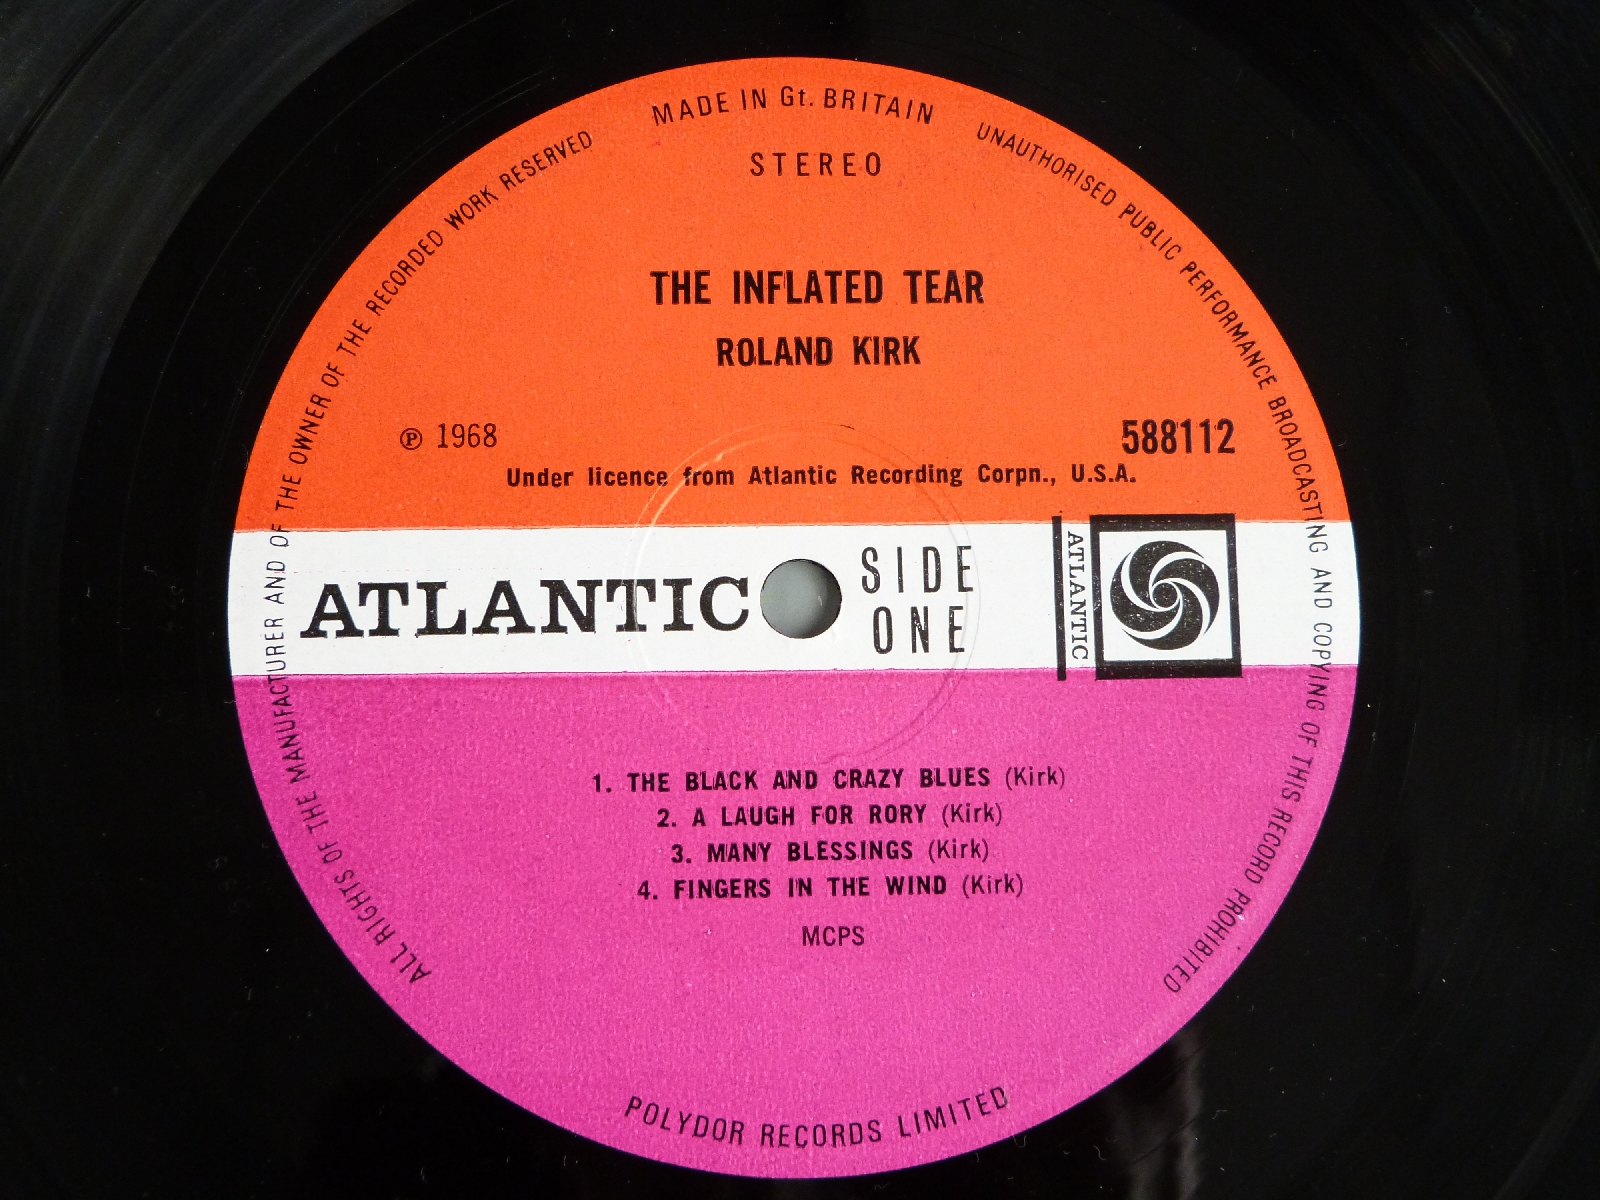 Roland Kirk - The Inflated Tear (588112) and The Man Who Cried Fire (VNLP1) both appear Ex/Ex - Image 4 of 7